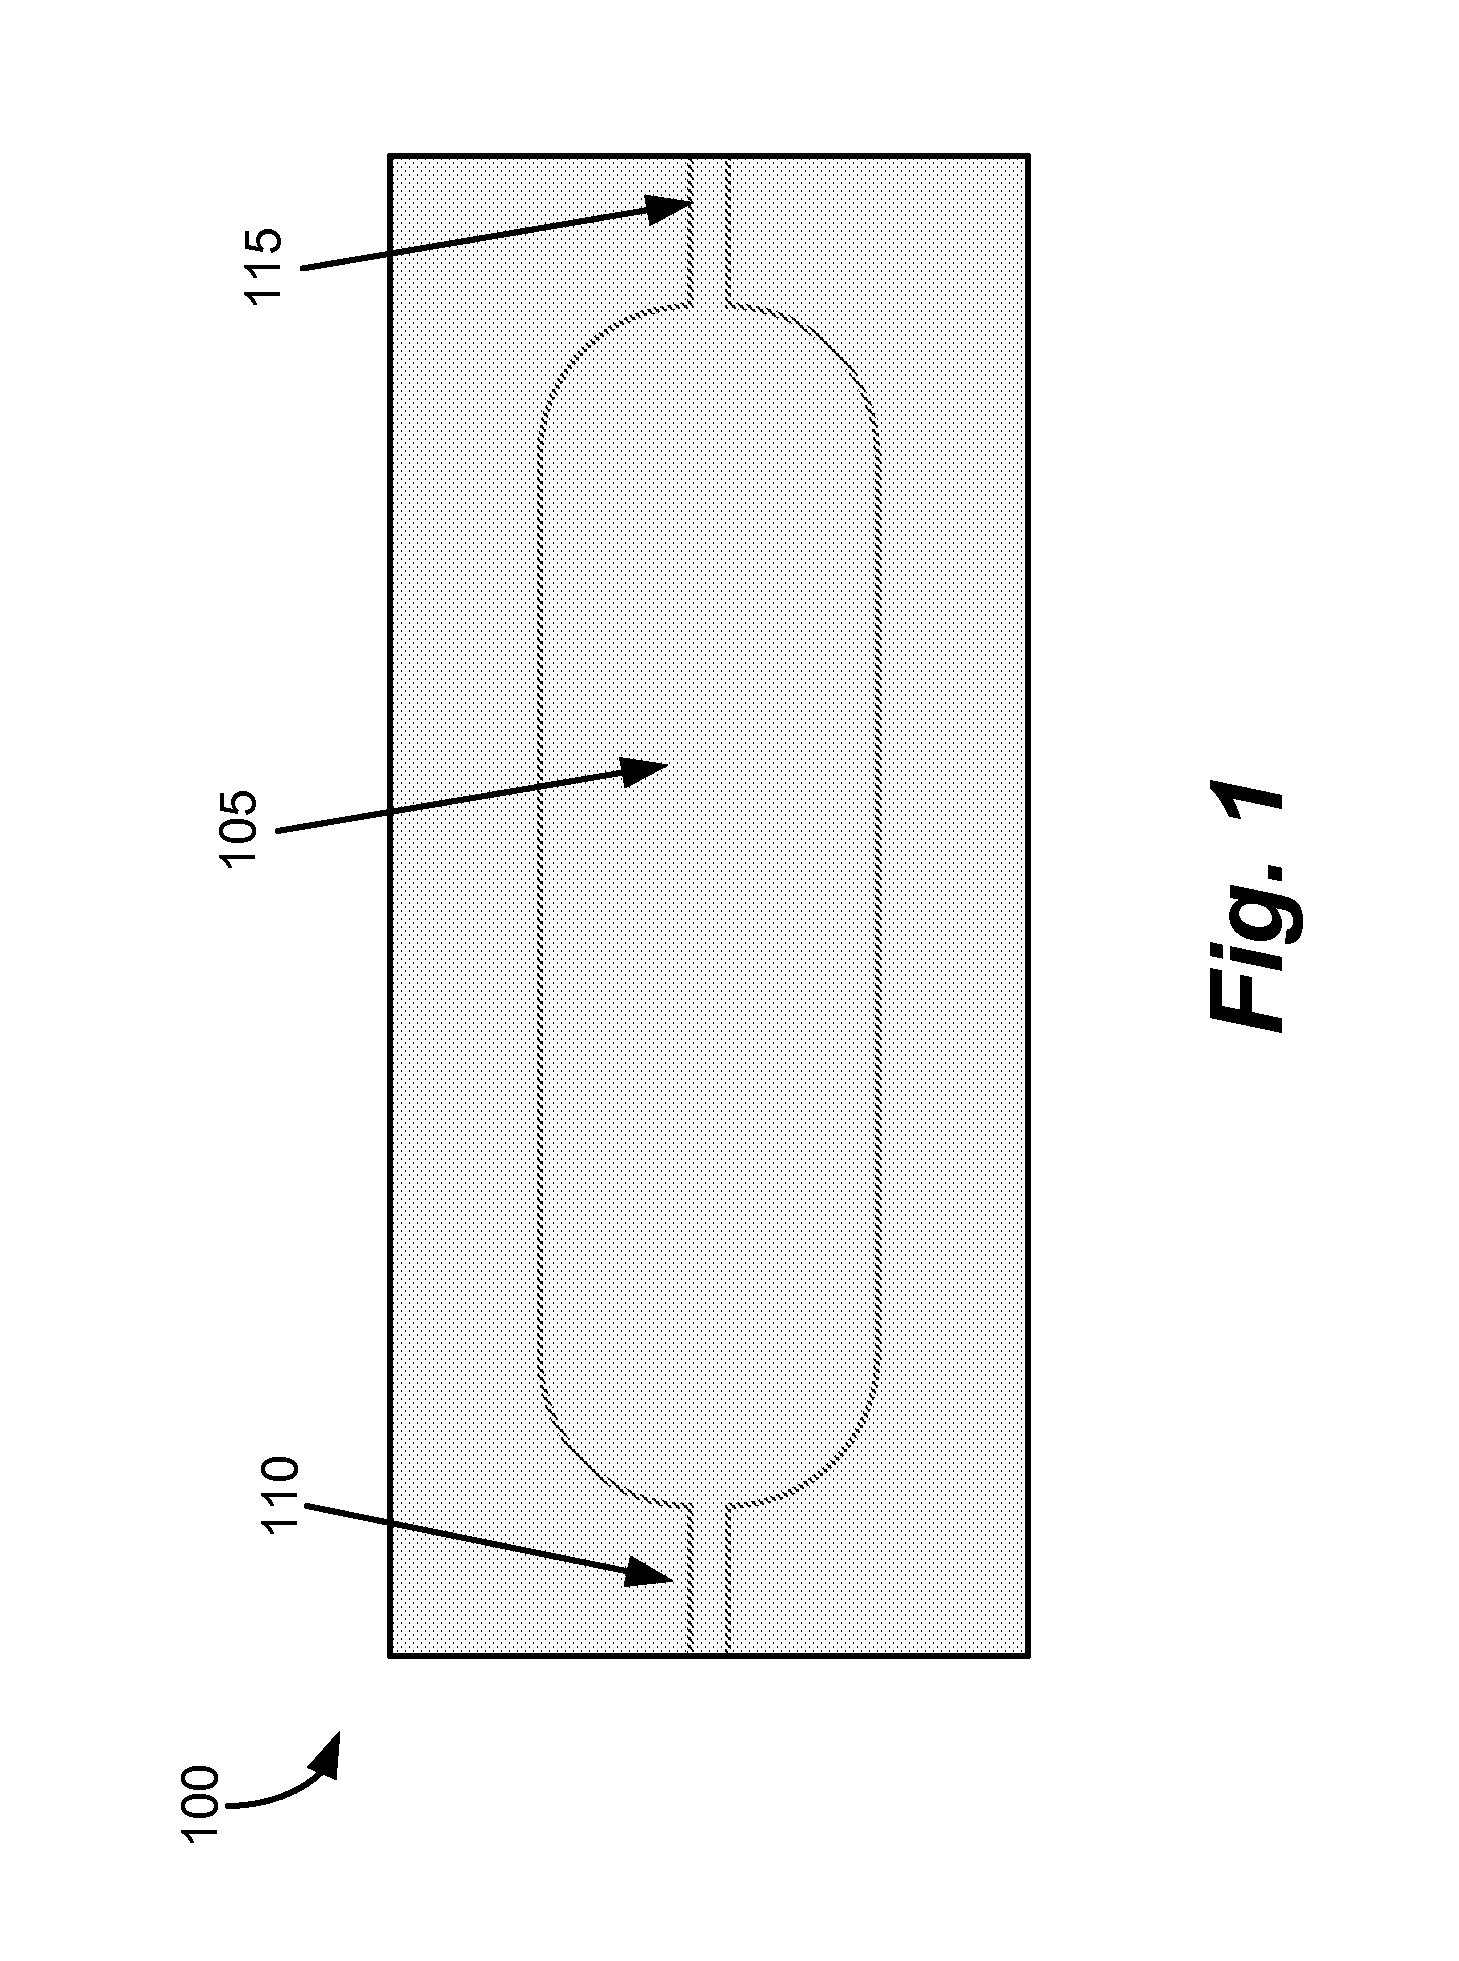 Flexible pouch and cartridge with fluidic circuits